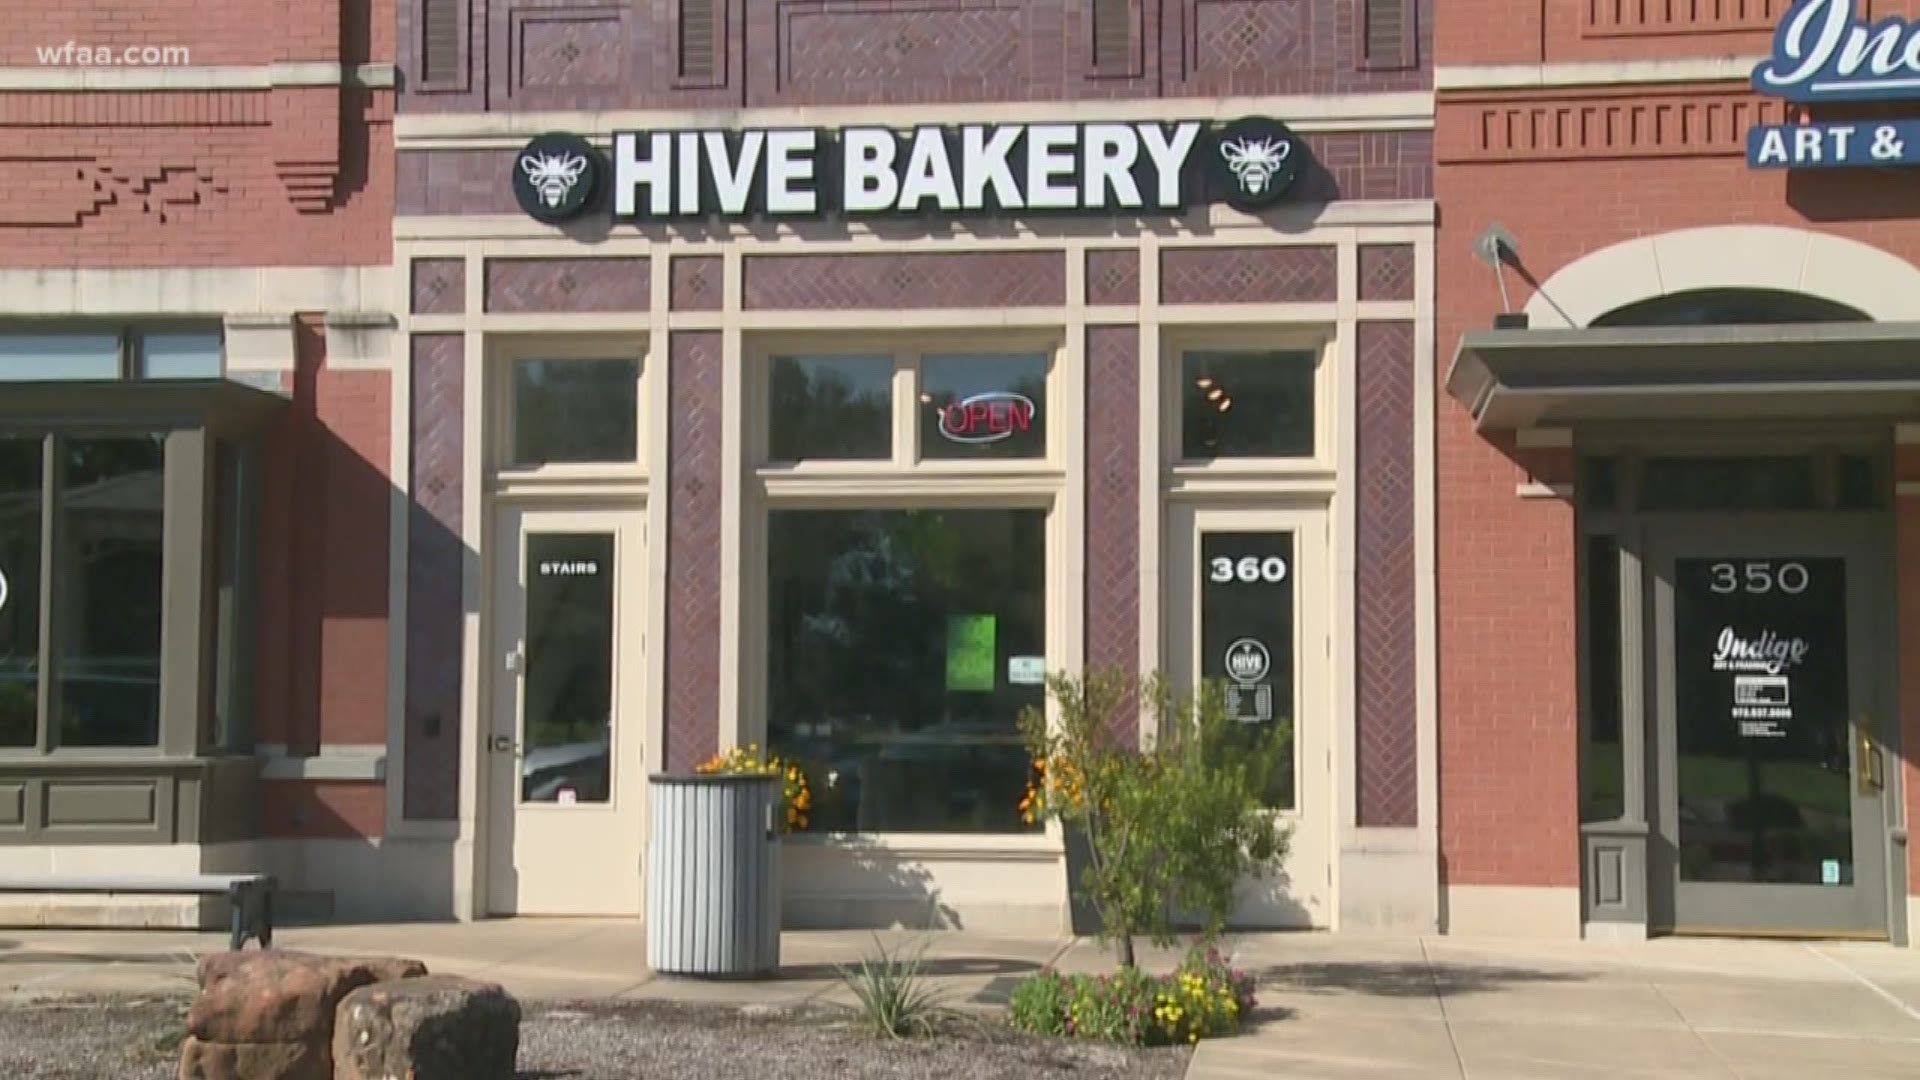 Edible works of art: Hive Bakery in Flower Mound competes on Food Network's 'Halloween Wars'